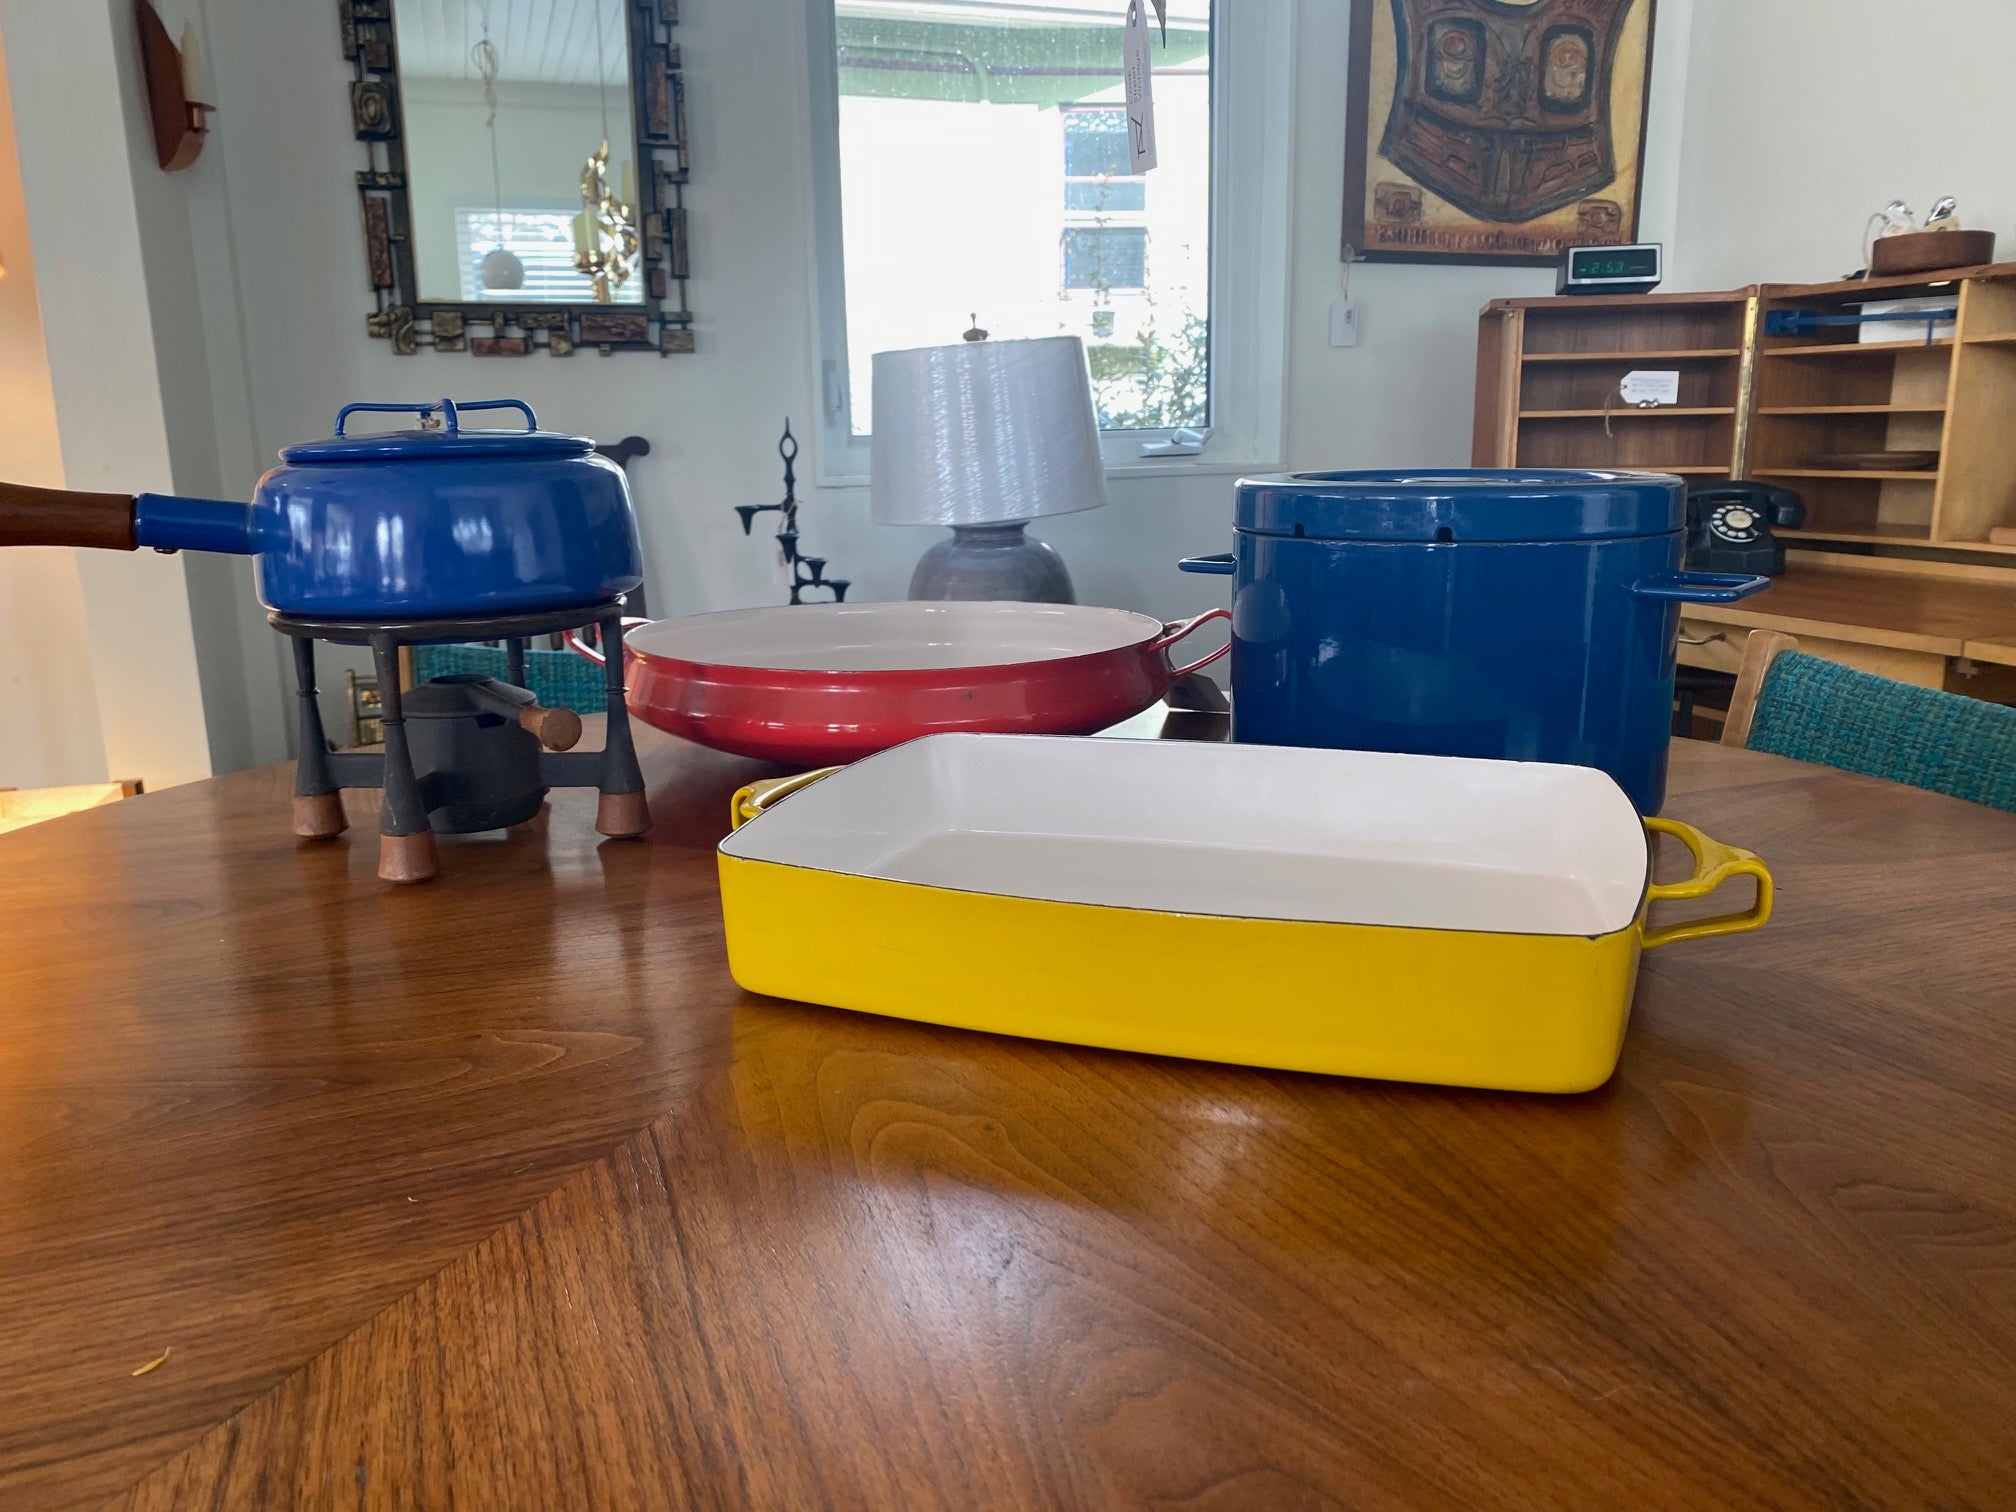 Yellow Kobenstyle Yellow JHQ Dansk Lasagne, our red Dansk pan and our blue JHQ Fondu pot, shown with our Blue Copco covered casserole-- Cook Street Vintage